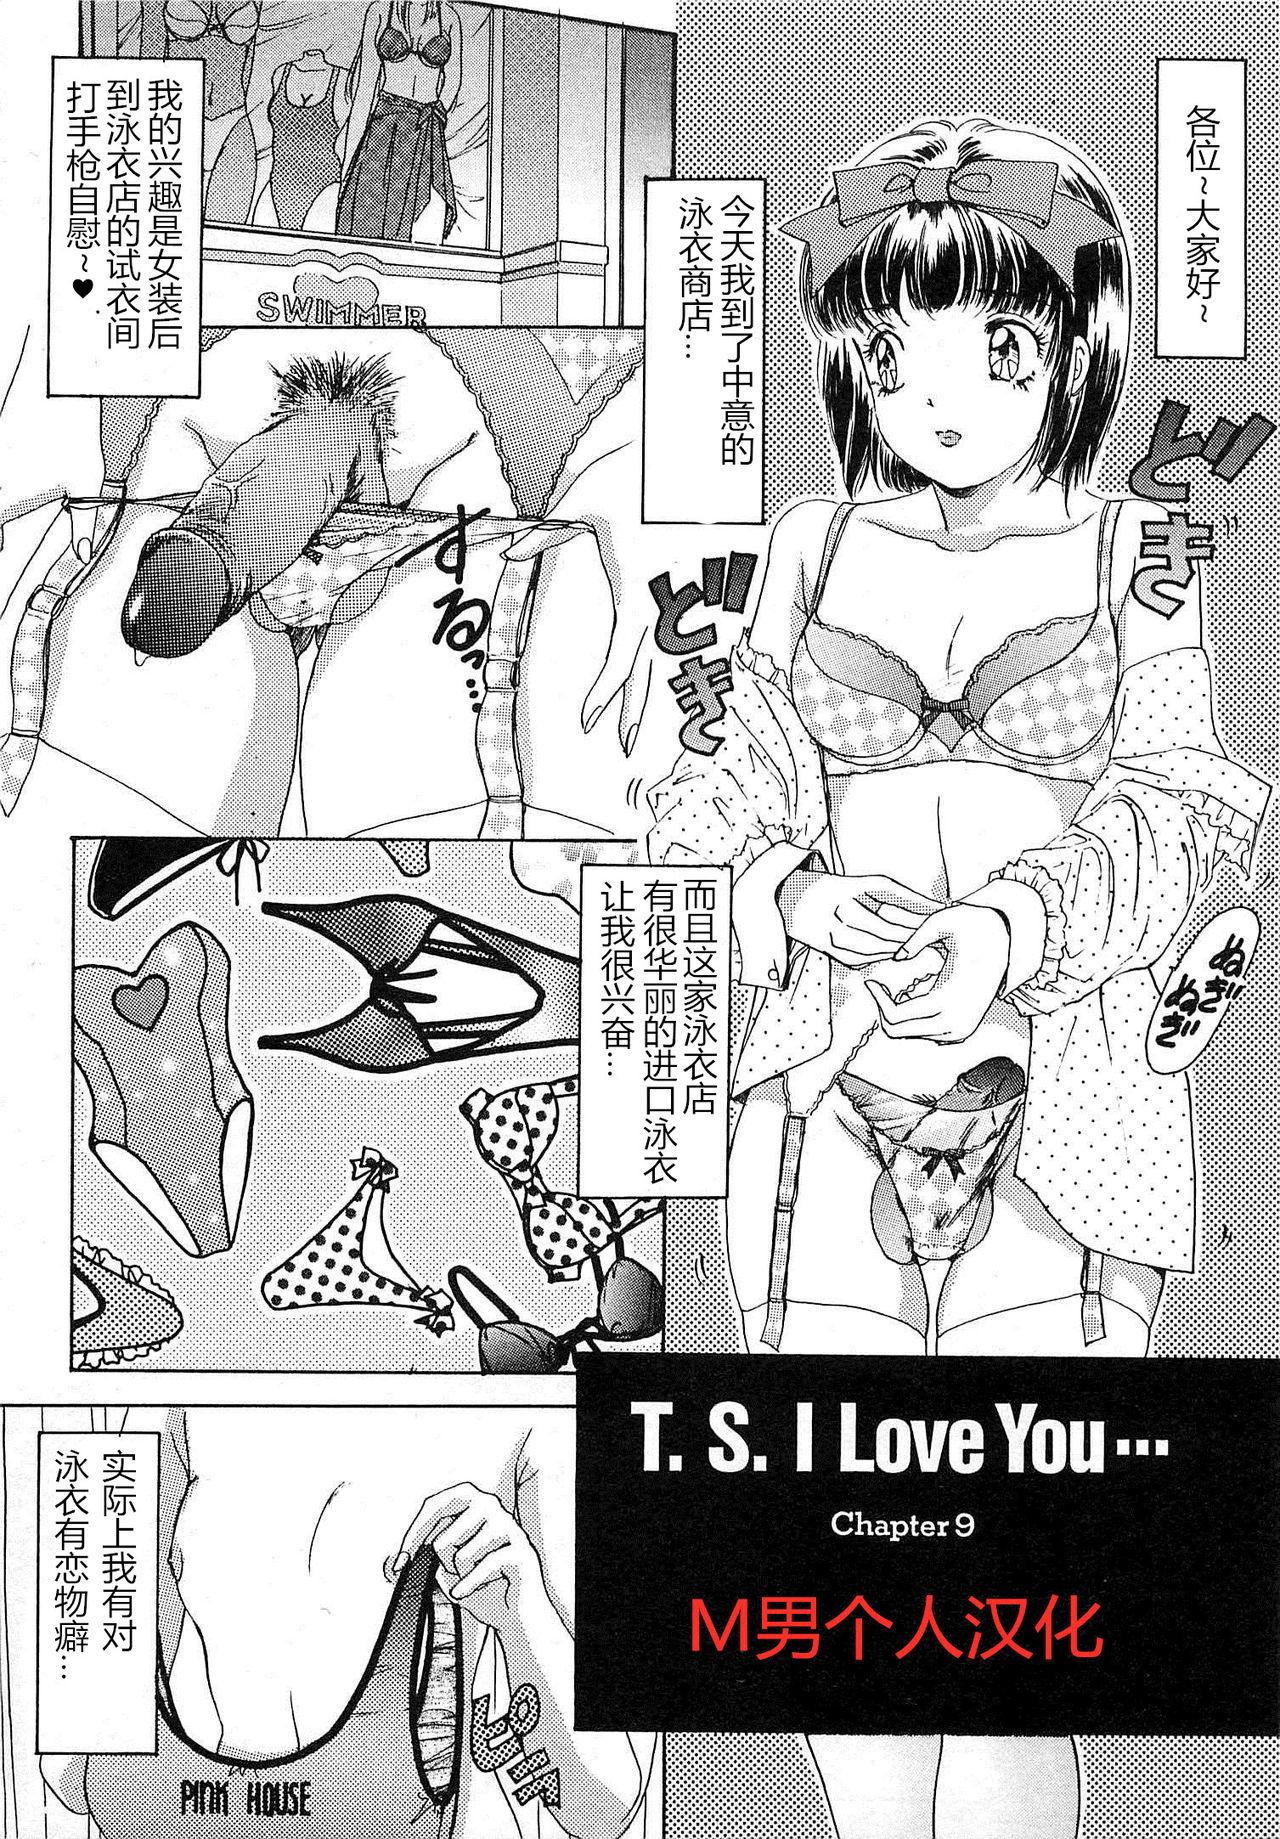 Police T.S. I LOVE YOU chapter 09 Italian - Page 1